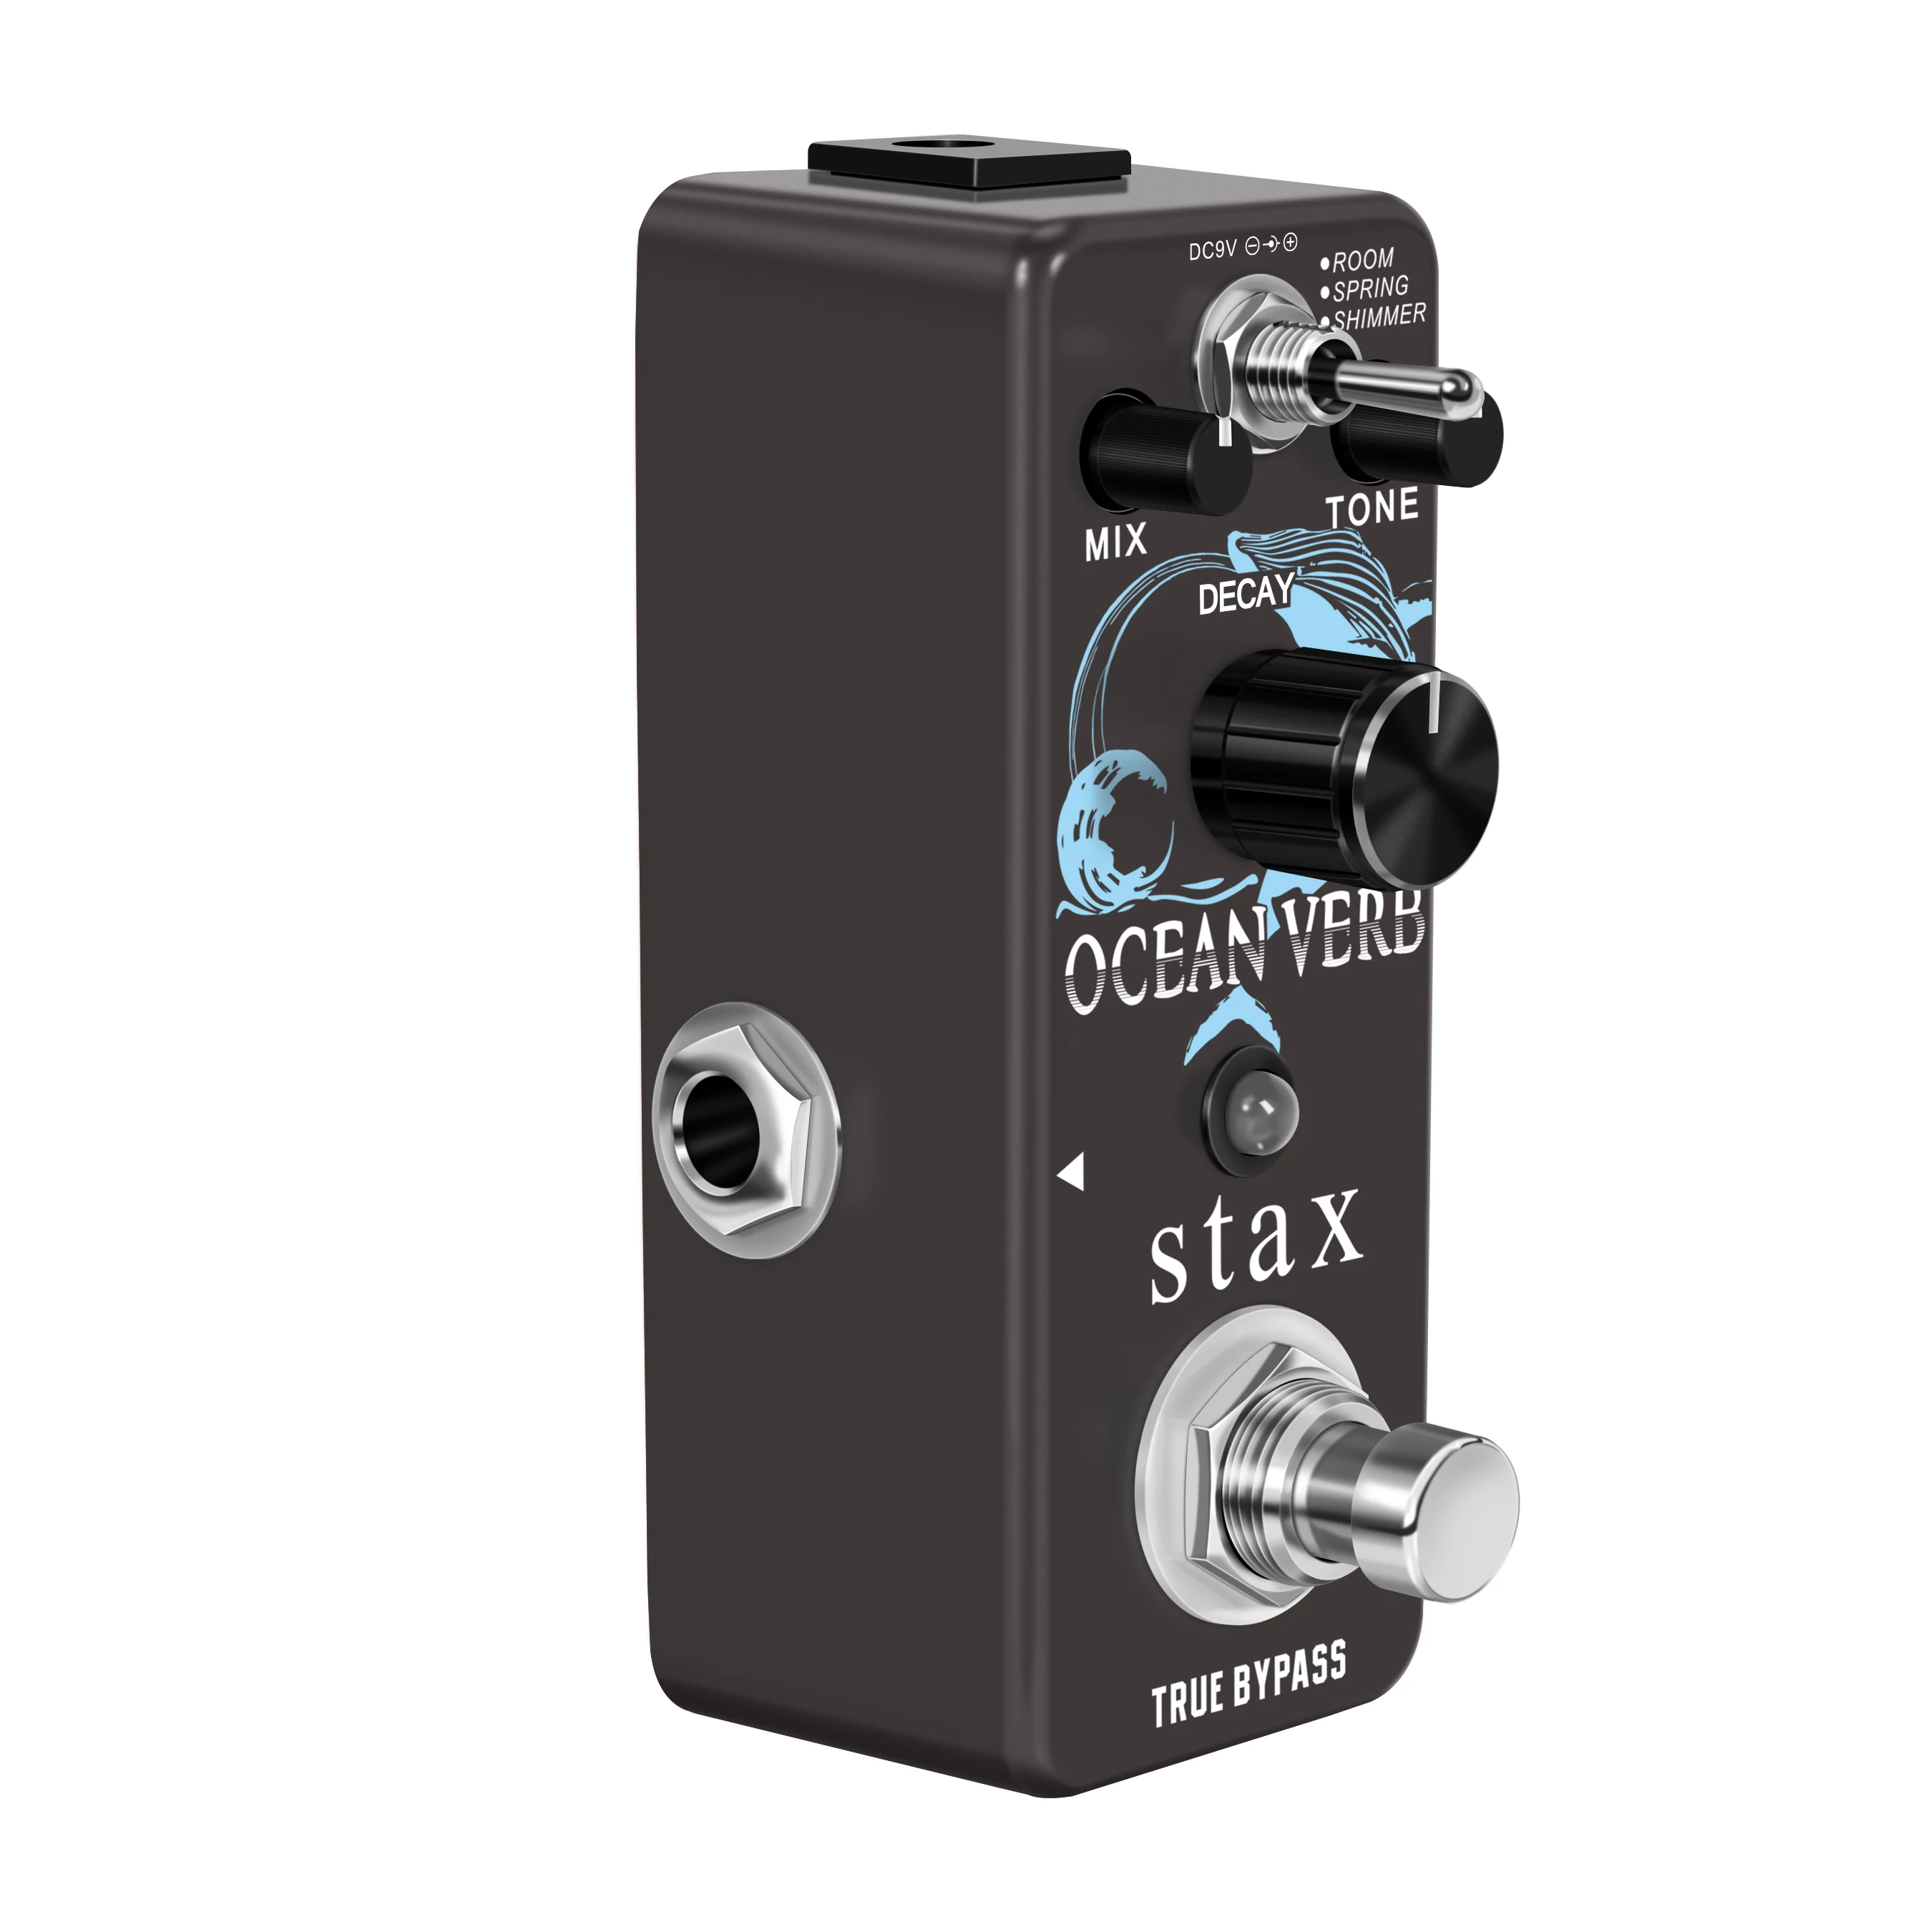 Stax Guitar Reverb Effect Pedal Digital Pedals Ocean Verb Pedal Room Spring Shimmer 3 Modes With True Bypass  LEF-3800 enlarge